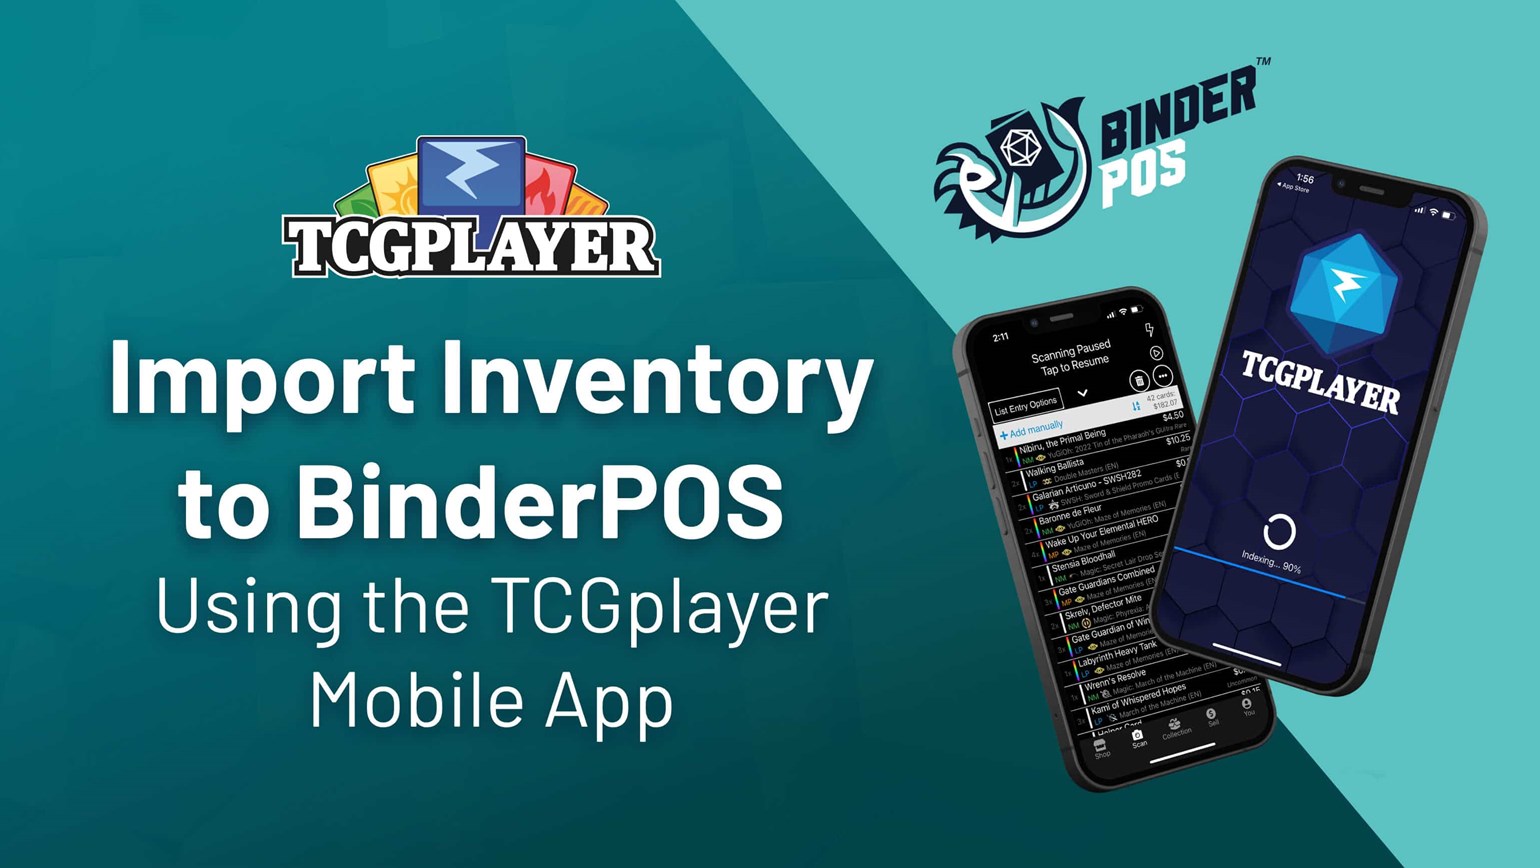 Import Inventory to BinderPOS Using the TCGplayer Mobile App